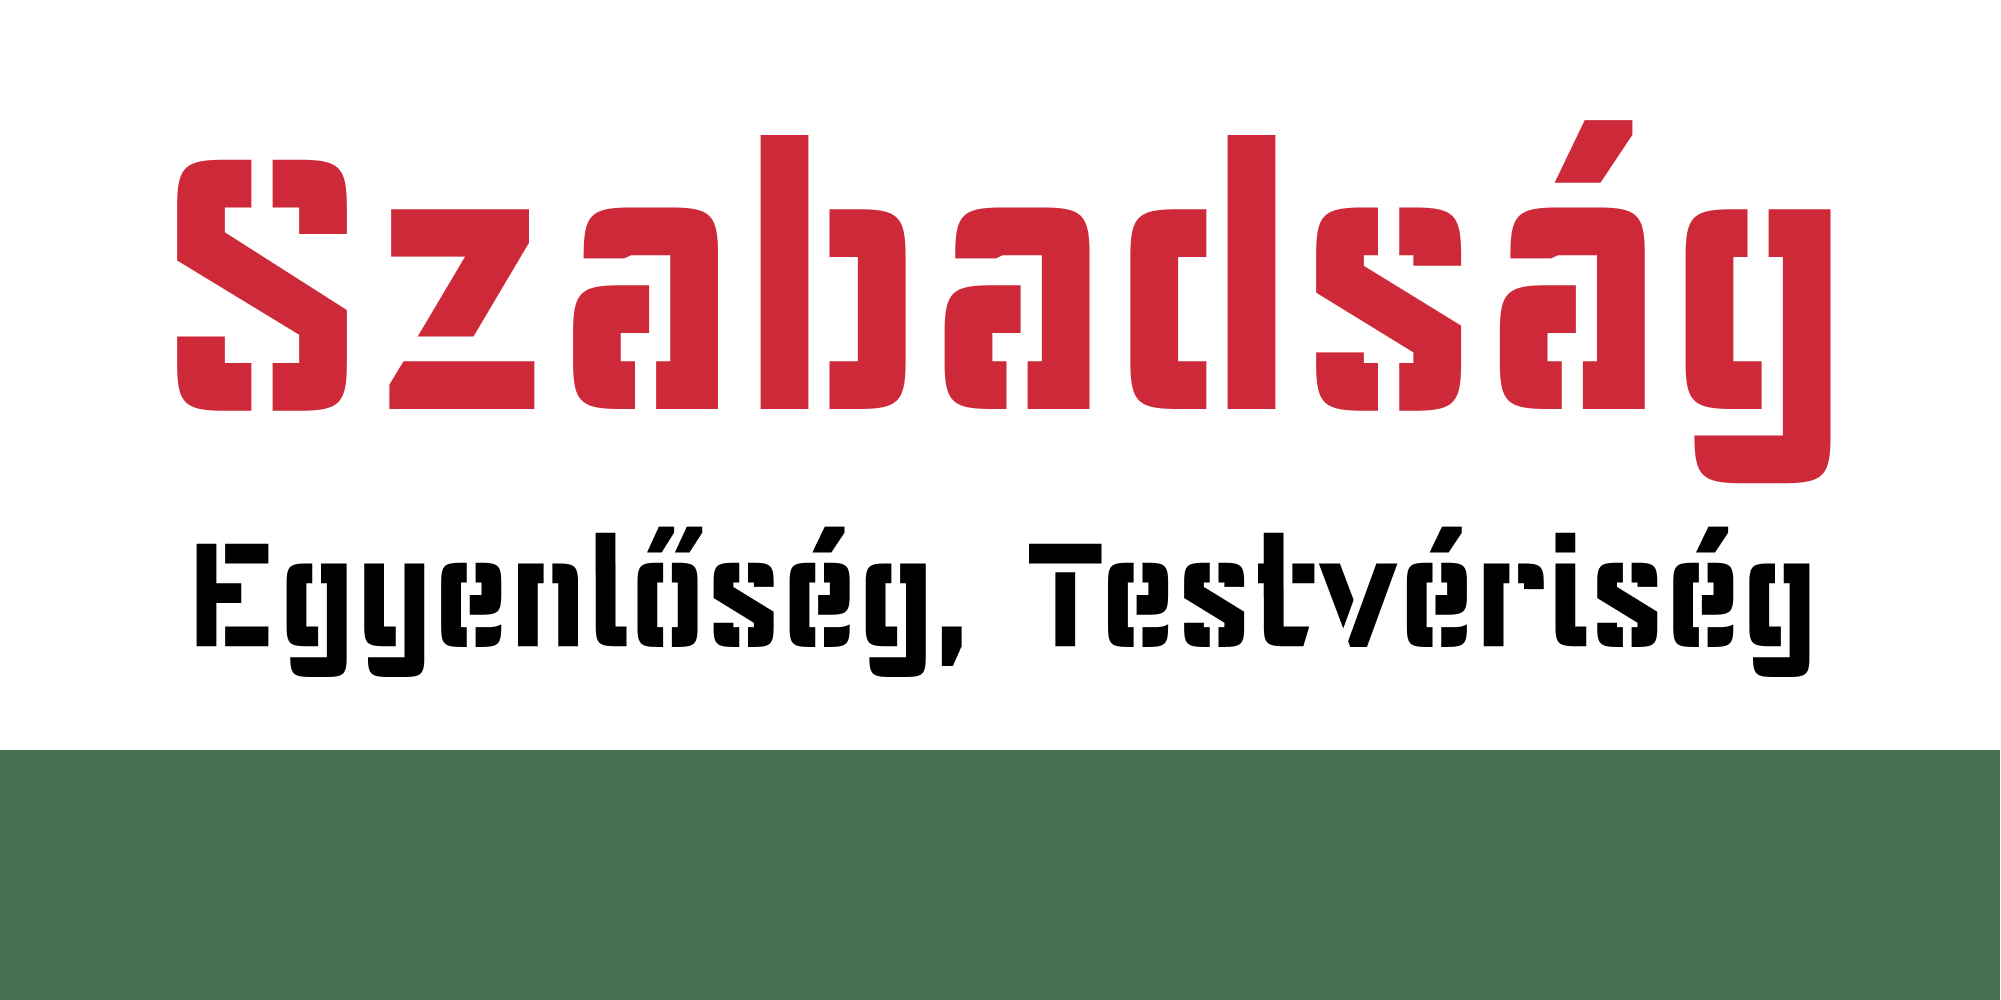 Anarchists' Stencil hungarian